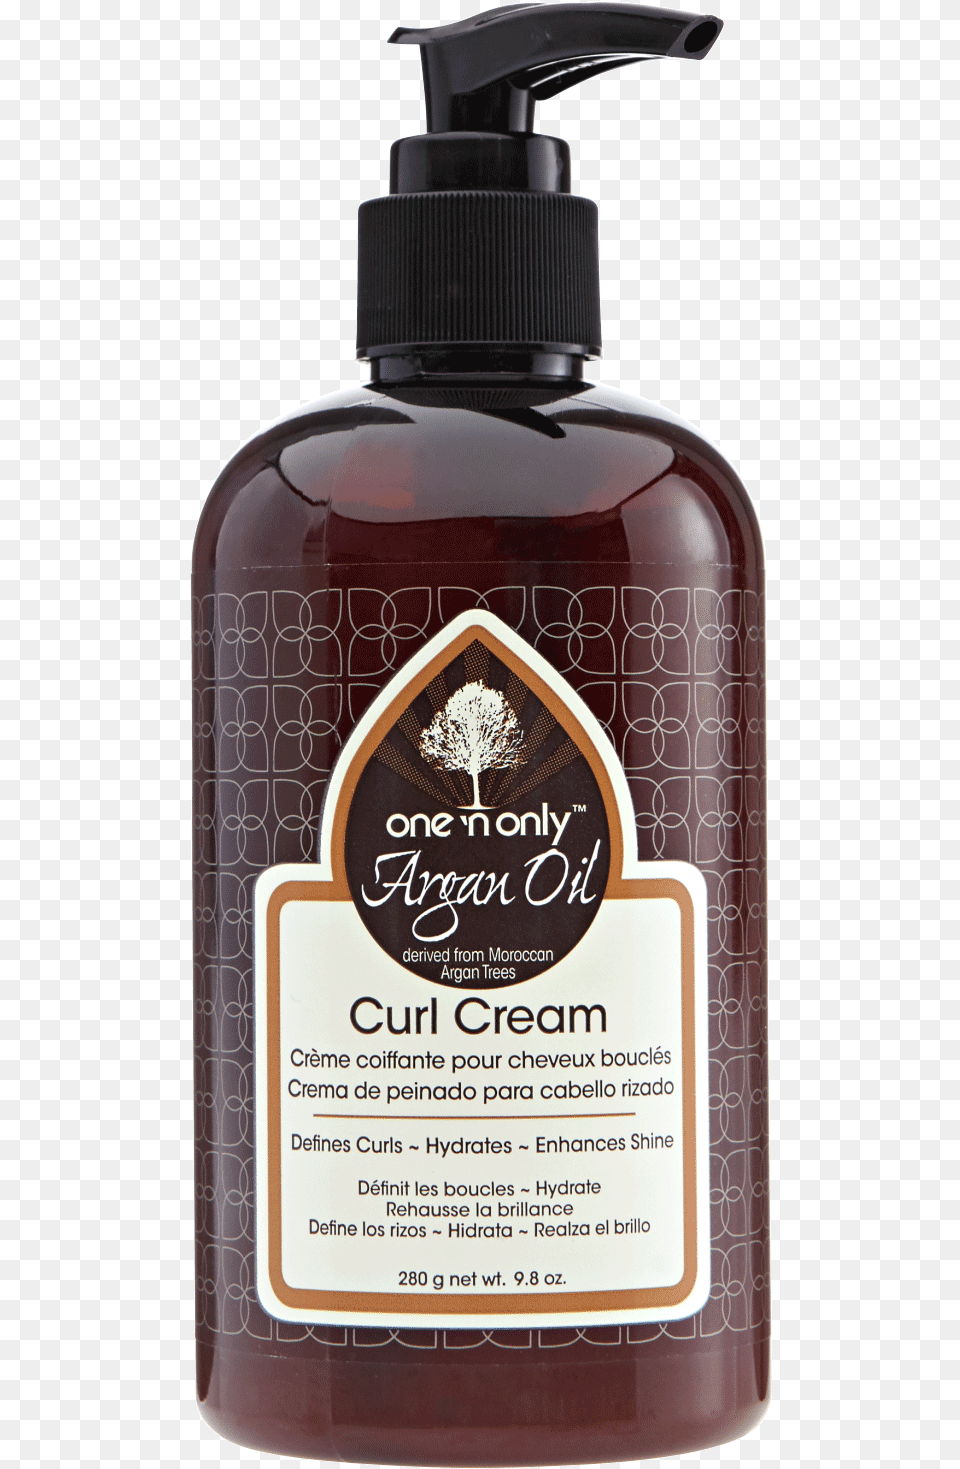 Mens Hair Salon With One N Only Argan Oil Curl Cream Argan Oil Curl Cream, Bottle, Lotion, Cosmetics, Perfume Png